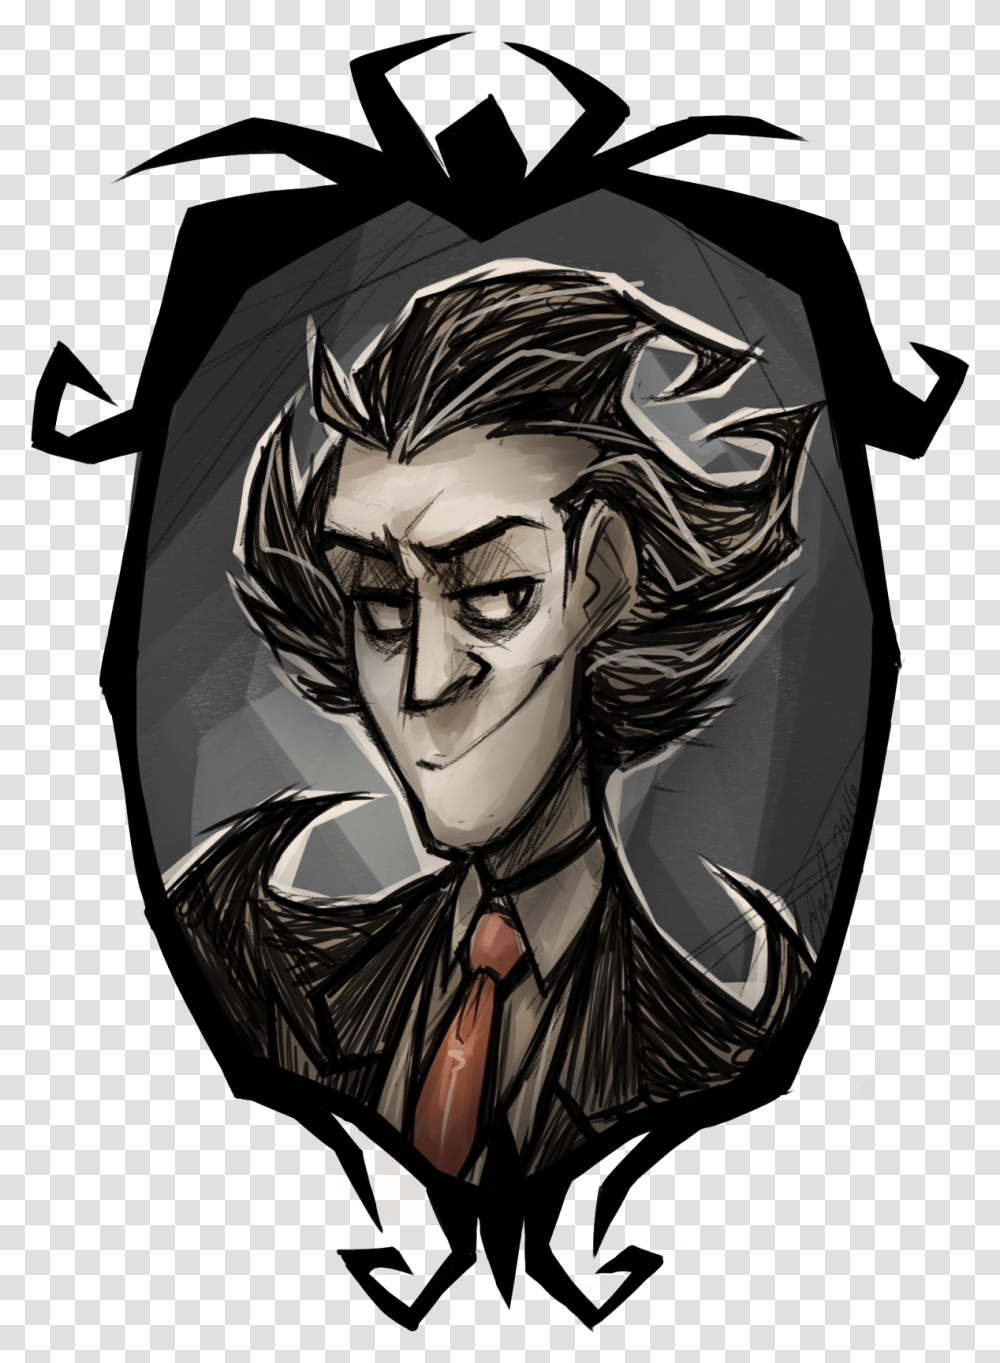 The Dont Starve Style Is Really Cool And Wilsons Don't Starve Wilson Fanart, Person, Manga, Comics, Book Transparent Png